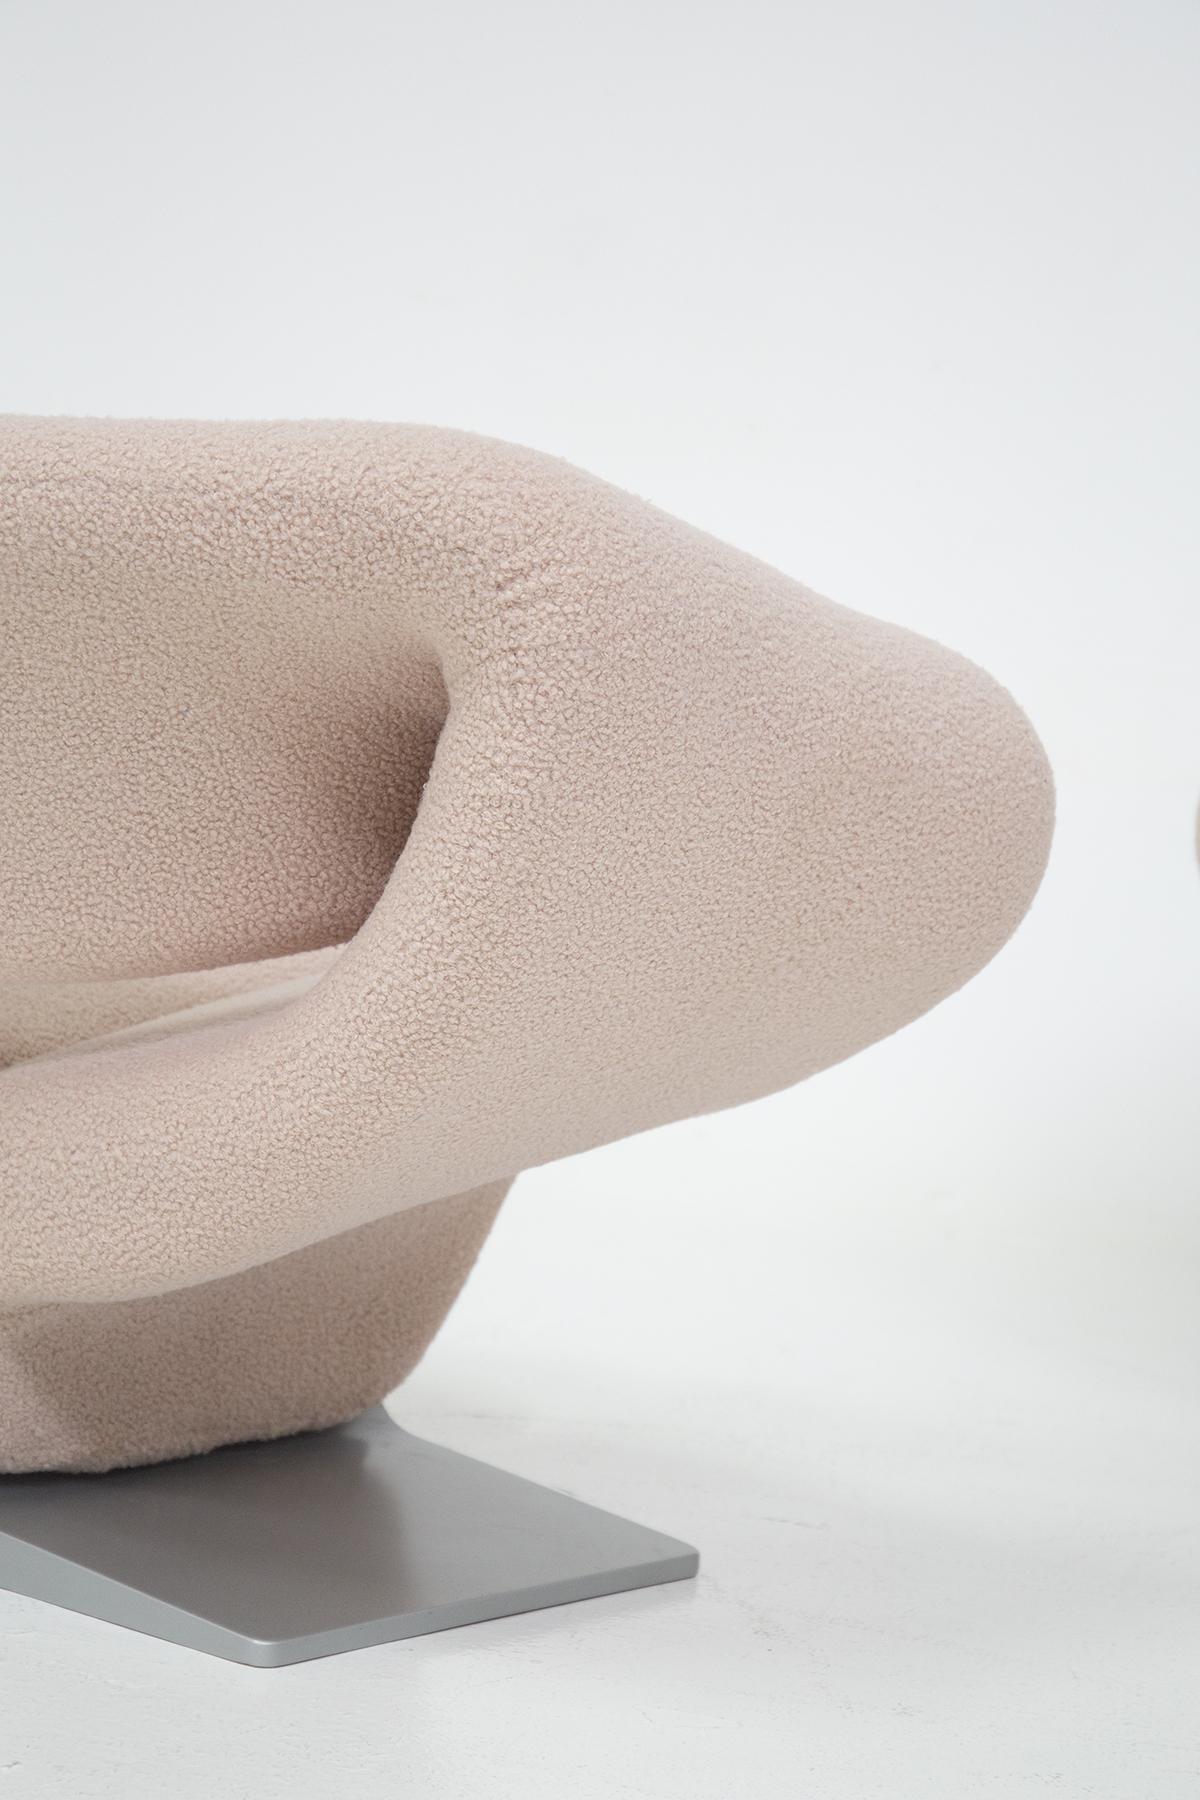 Mid-20th Century Pierre Paulin Ribbon Armchairs for Artifort in Pink Bouclè, First Edition